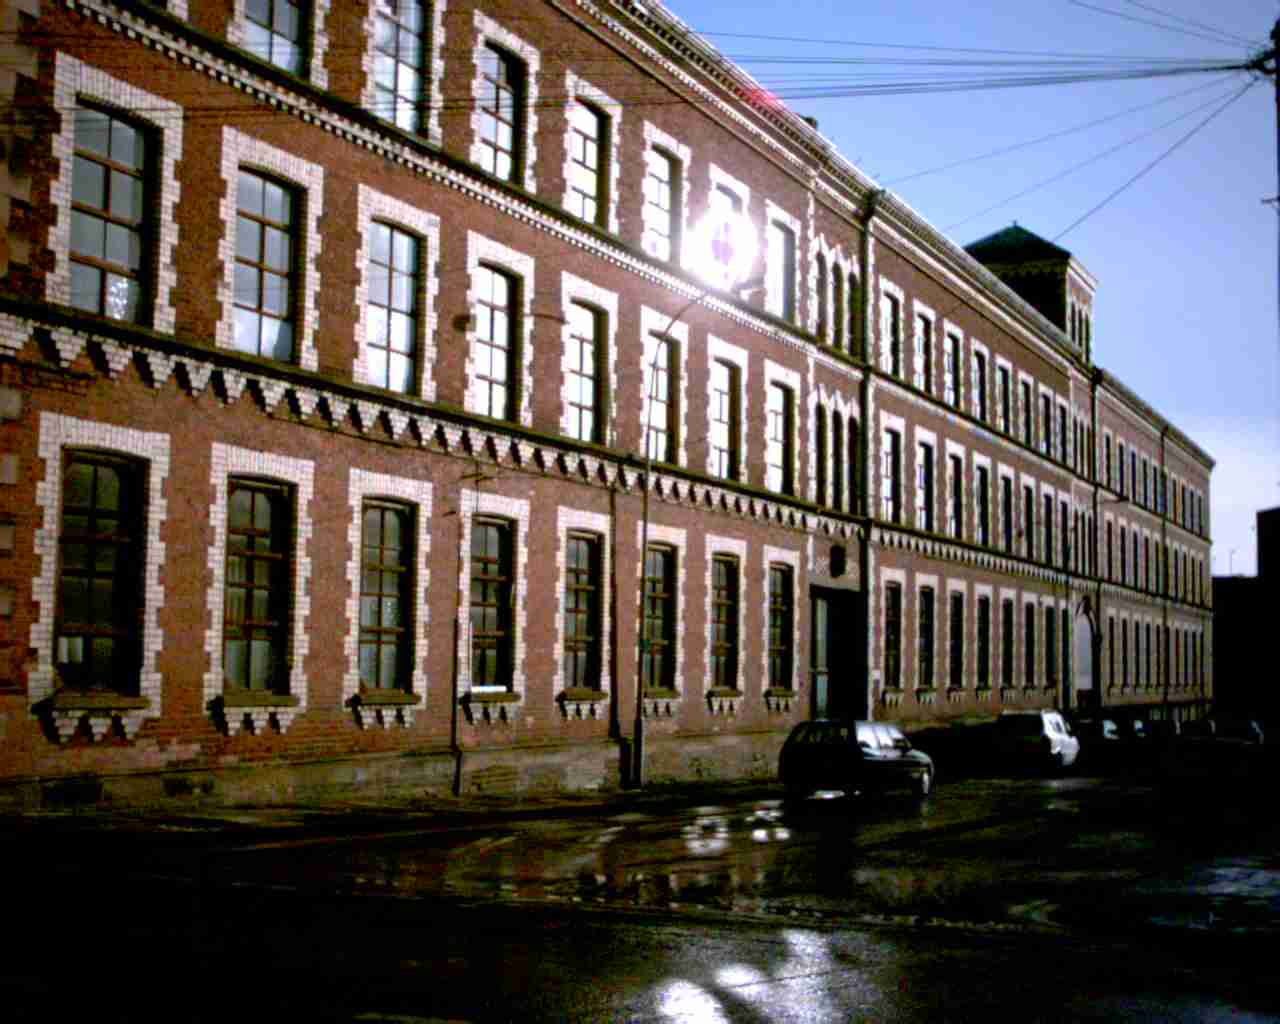 This is a photograph of the former City shirt factory.